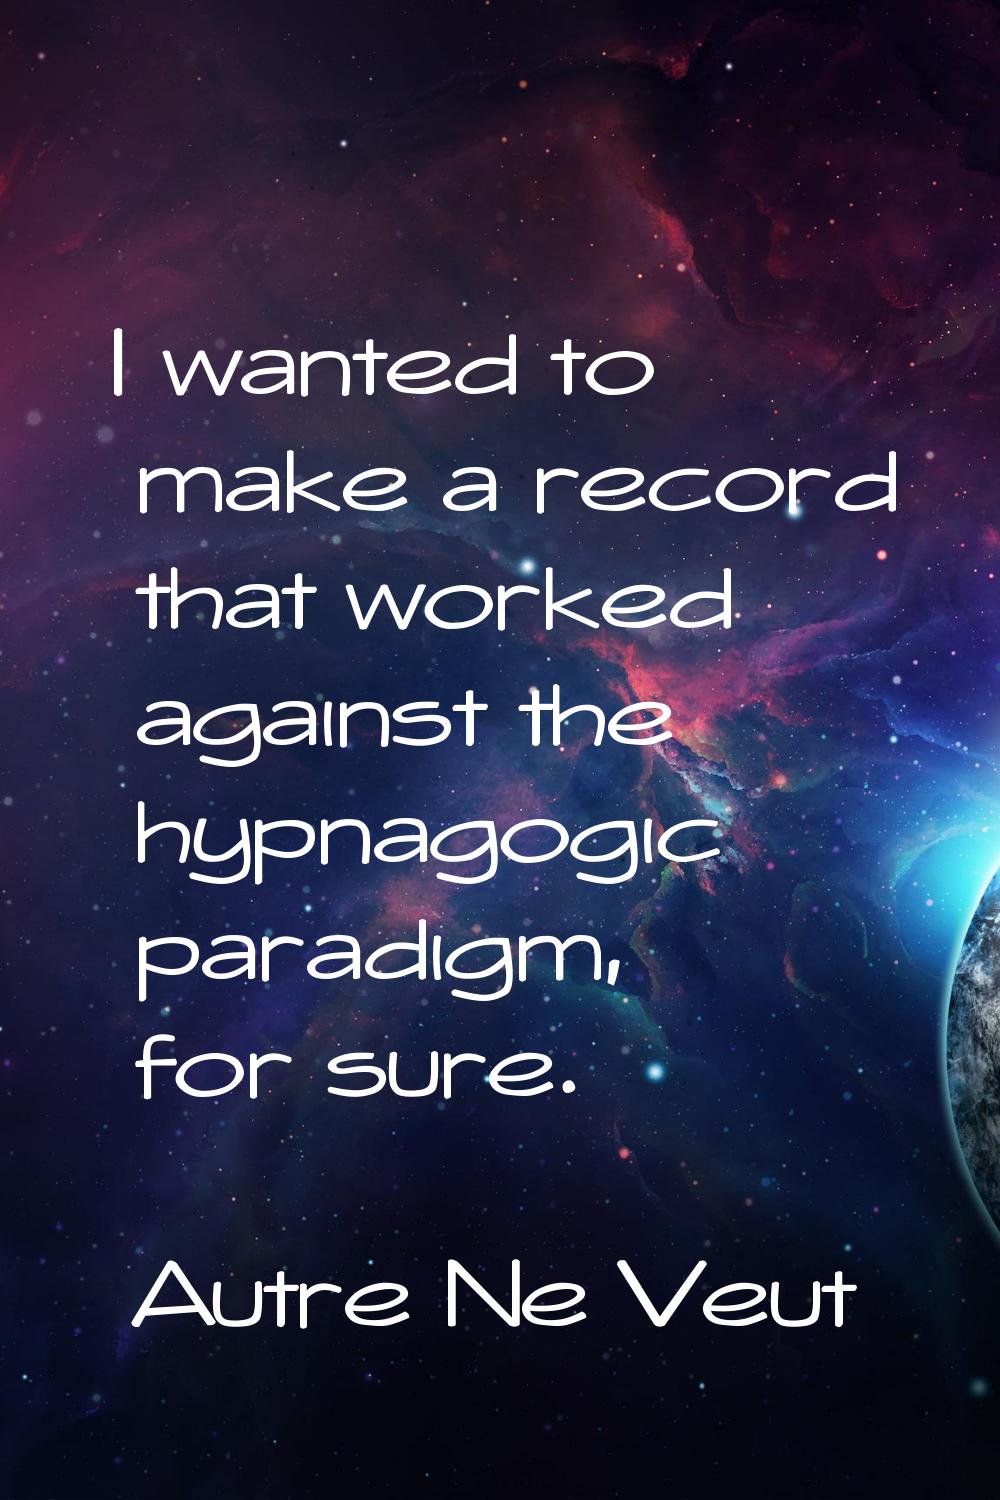 I wanted to make a record that worked against the hypnagogic paradigm, for sure.